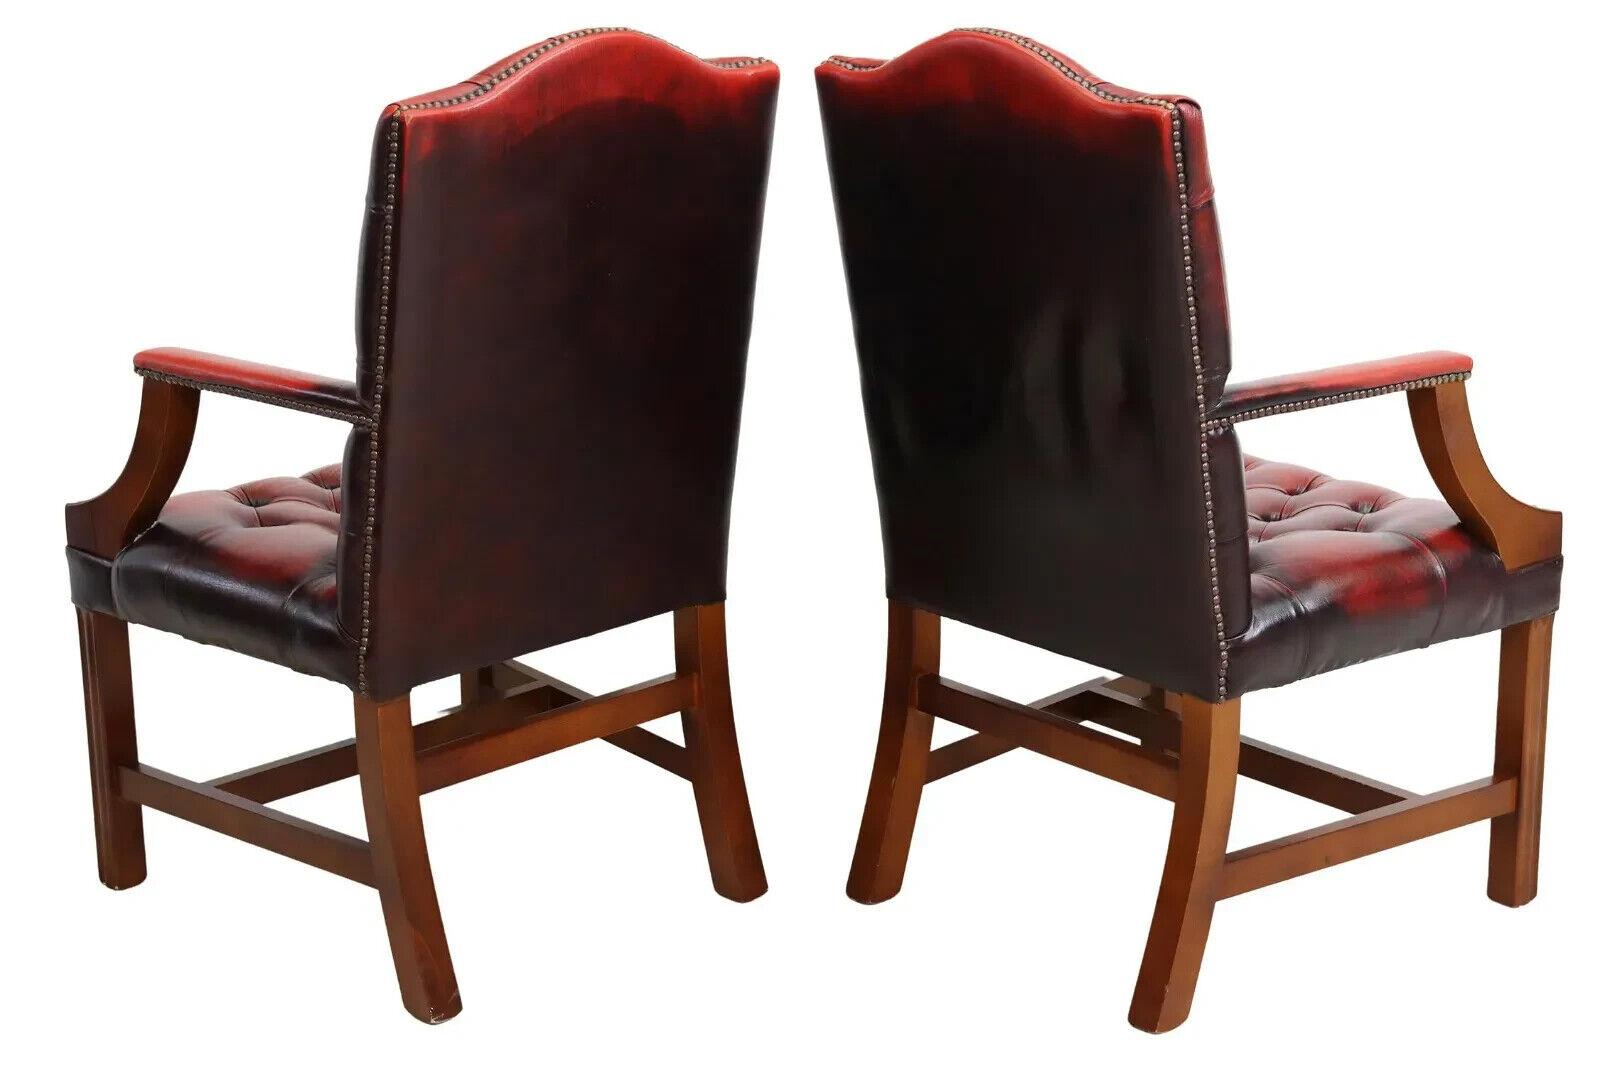 20th C. Red Leather, English, Six, GainsBorough Style, Nailhead Trim Armchairs! For Sale 2